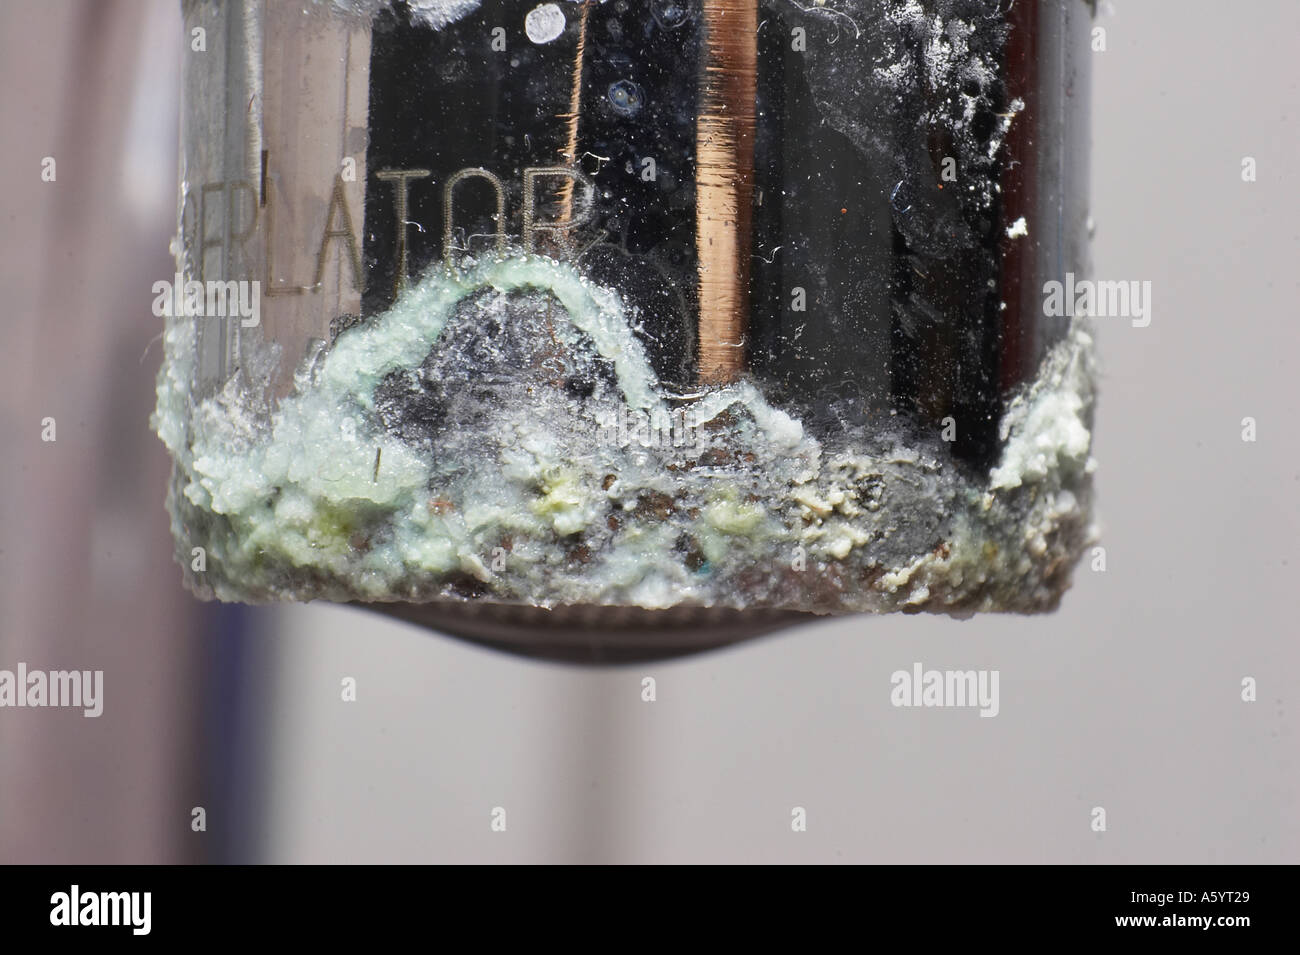 calcification of water tap Stock Photo